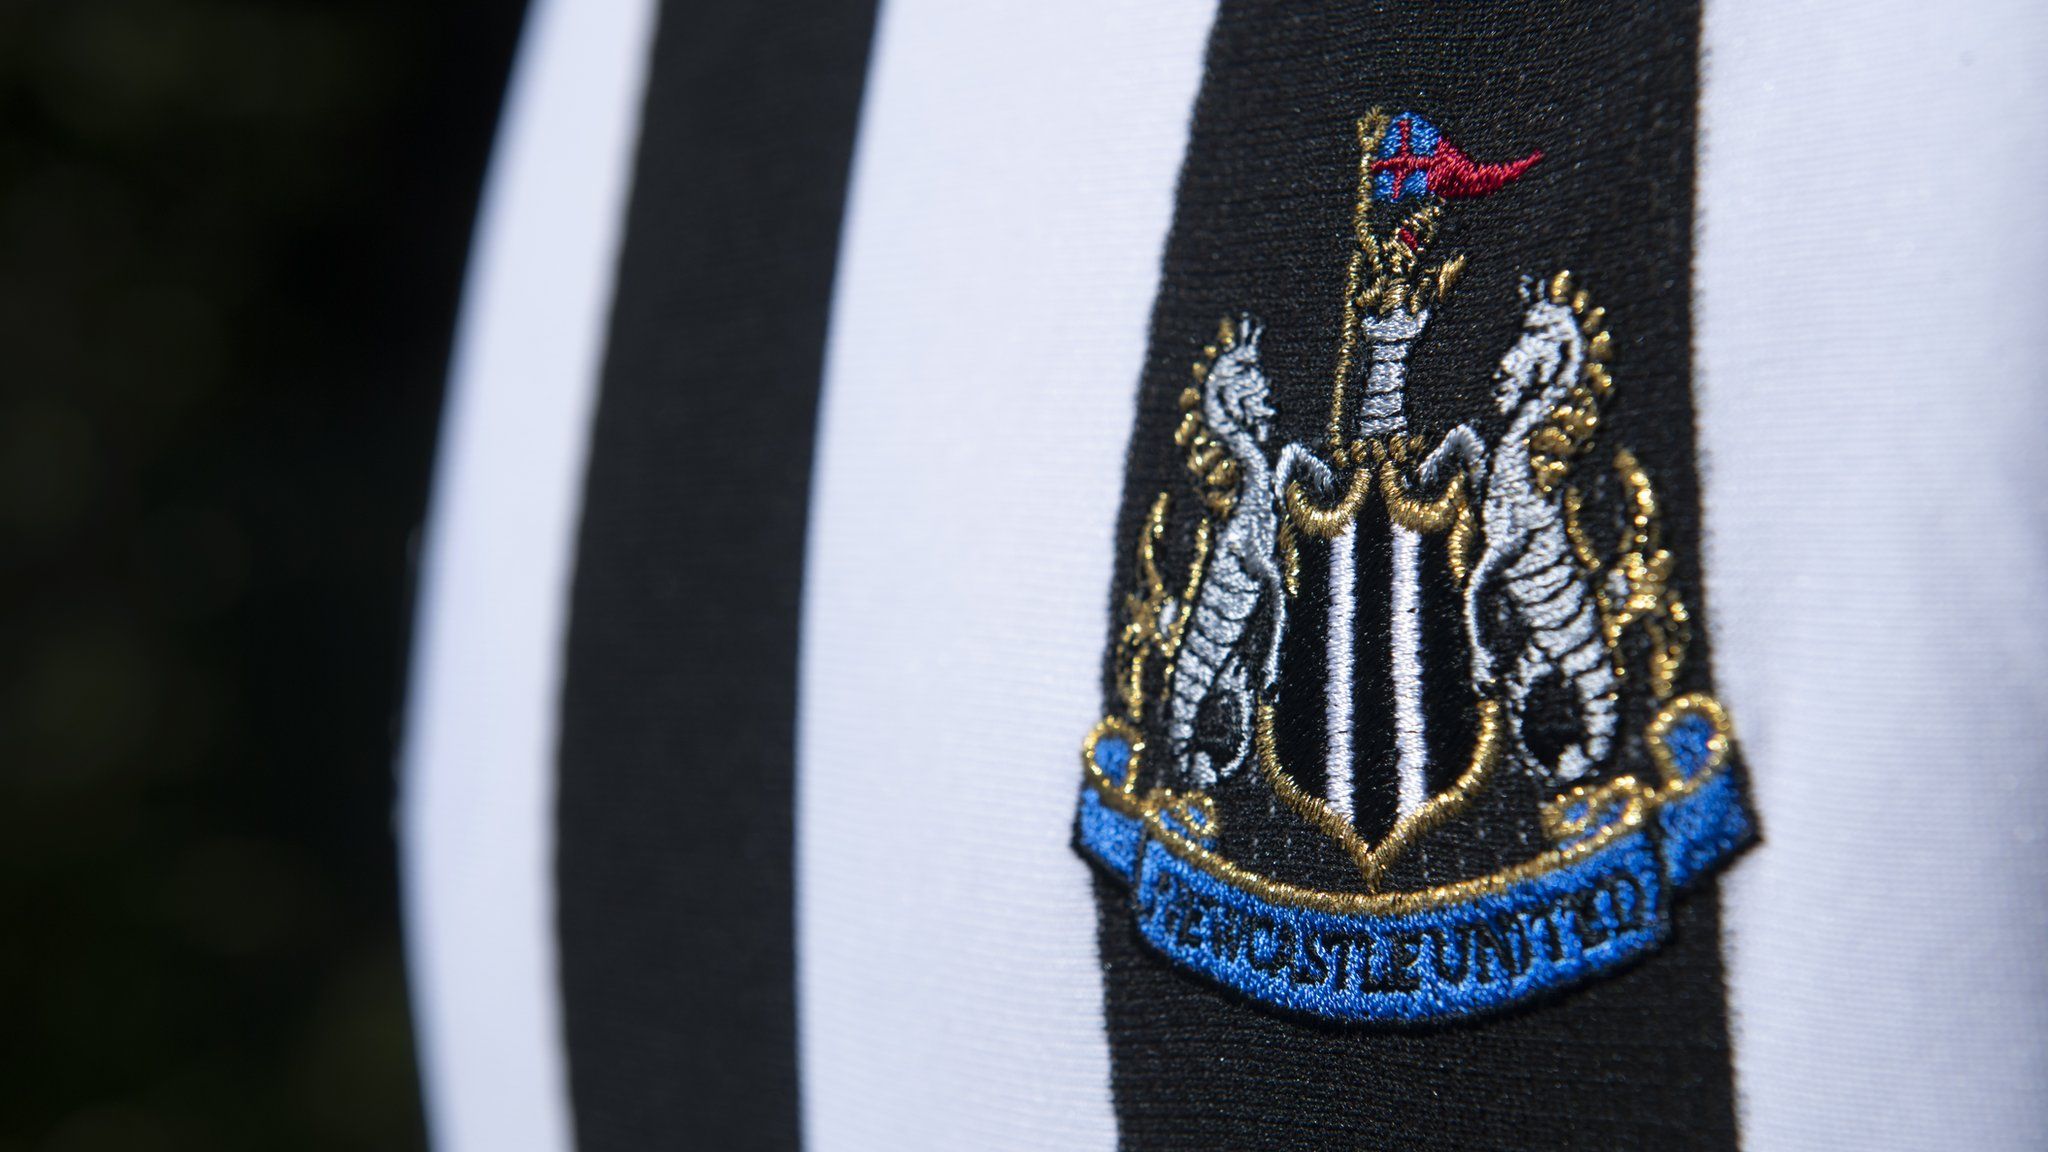 Newcastle United's crest on a first team shirt with black and white stripes